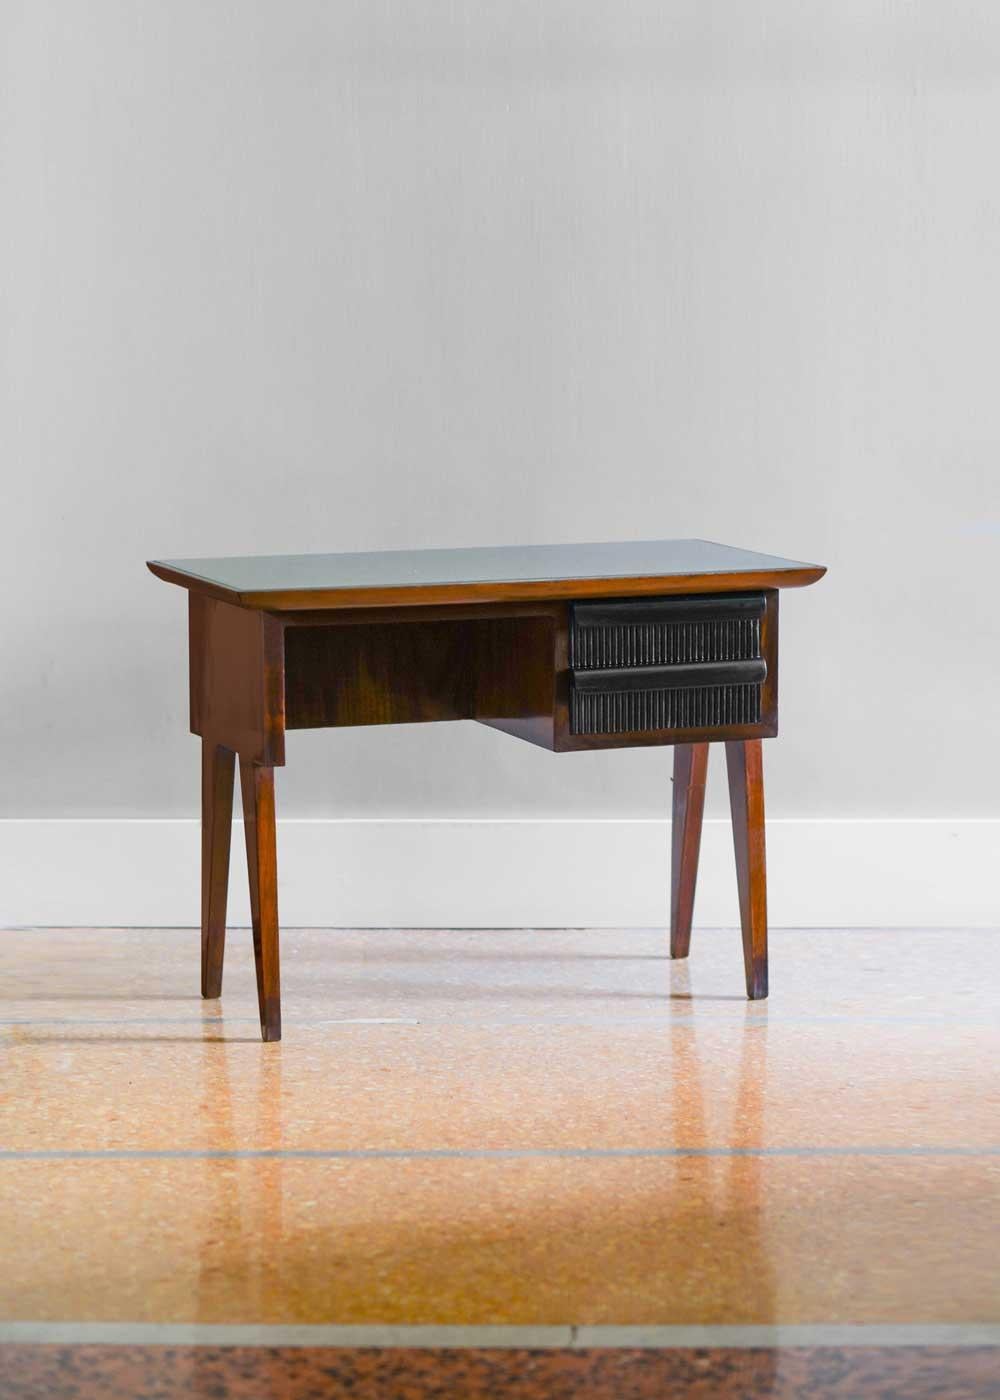 Wooden console with colored glass top and drawers, Italy 1960
Product details
Dimensions 91 W x 67 H x 51 D cm